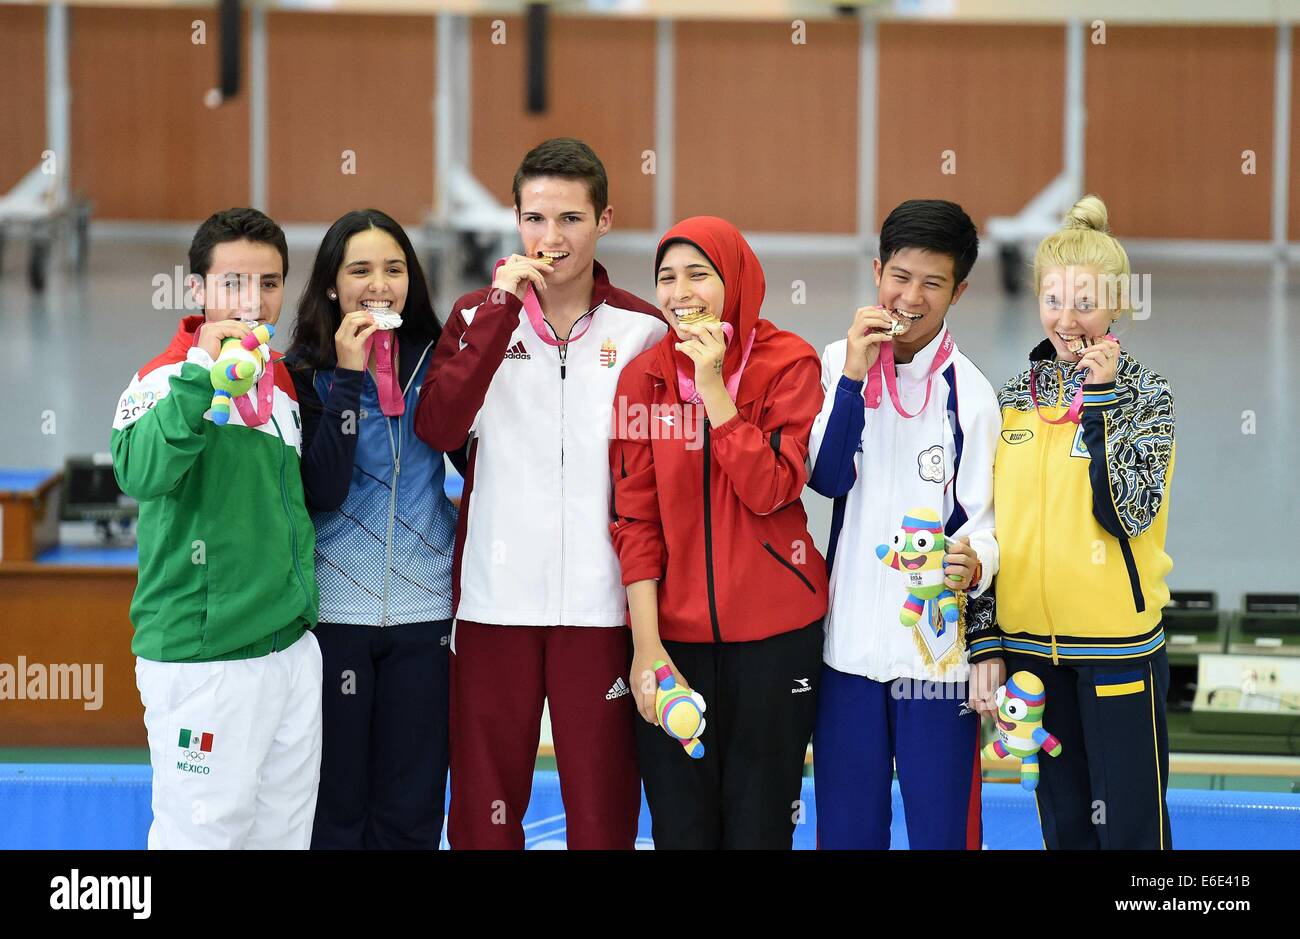 Nanjing, China's Jiangsu Province. 22nd Aug, 2014. Gold medalist Istvan Peni (3rd, L) of Hungary and Hadir Mekhimar (3rd, R) of Egypt, sliver medalist Jose Santos Valdes Martinez (1st, L) of Mexico and Fernanda Russo (2nd, L) of Argentina, bronze medalist Lu Shao-Chuan (2nd, R) of Chinese Taipei and Viktoriya Sukhorukova of Ukraine pose on the podium during the awarding ceremony of the 10m Air Rifle Mixed International Teams Competition at Nanjing 2014 Youth Olympic Games in Nanjing, east China's Jiangsu Province, August 22, 2014. Credit:  Huang Xiaobang/Xinhua/Alamy Live News Stock Photo